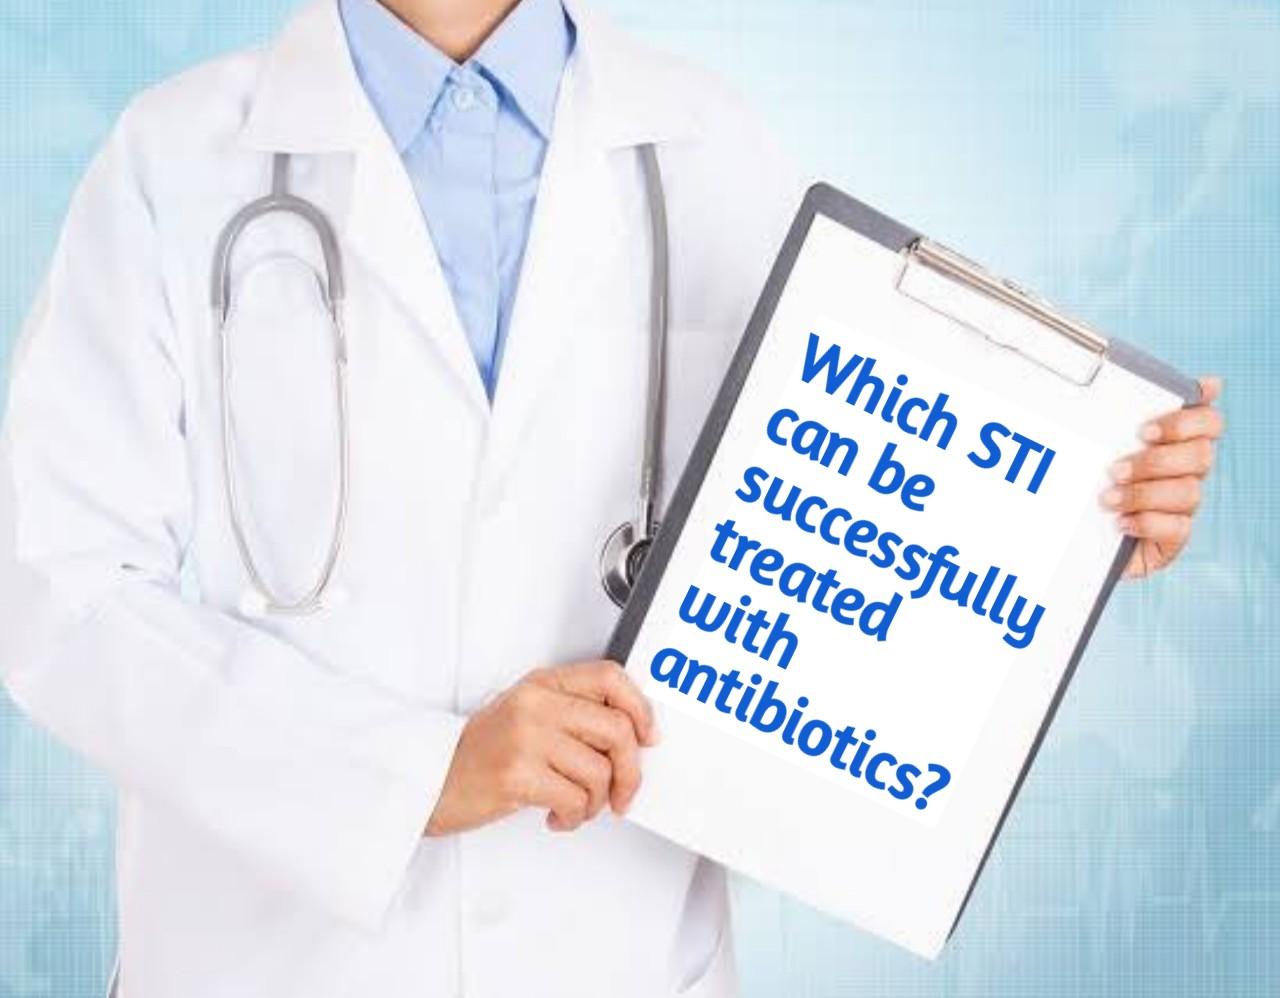 Which sexually transmitted infection (STI) can be successfully treated with antibiotics